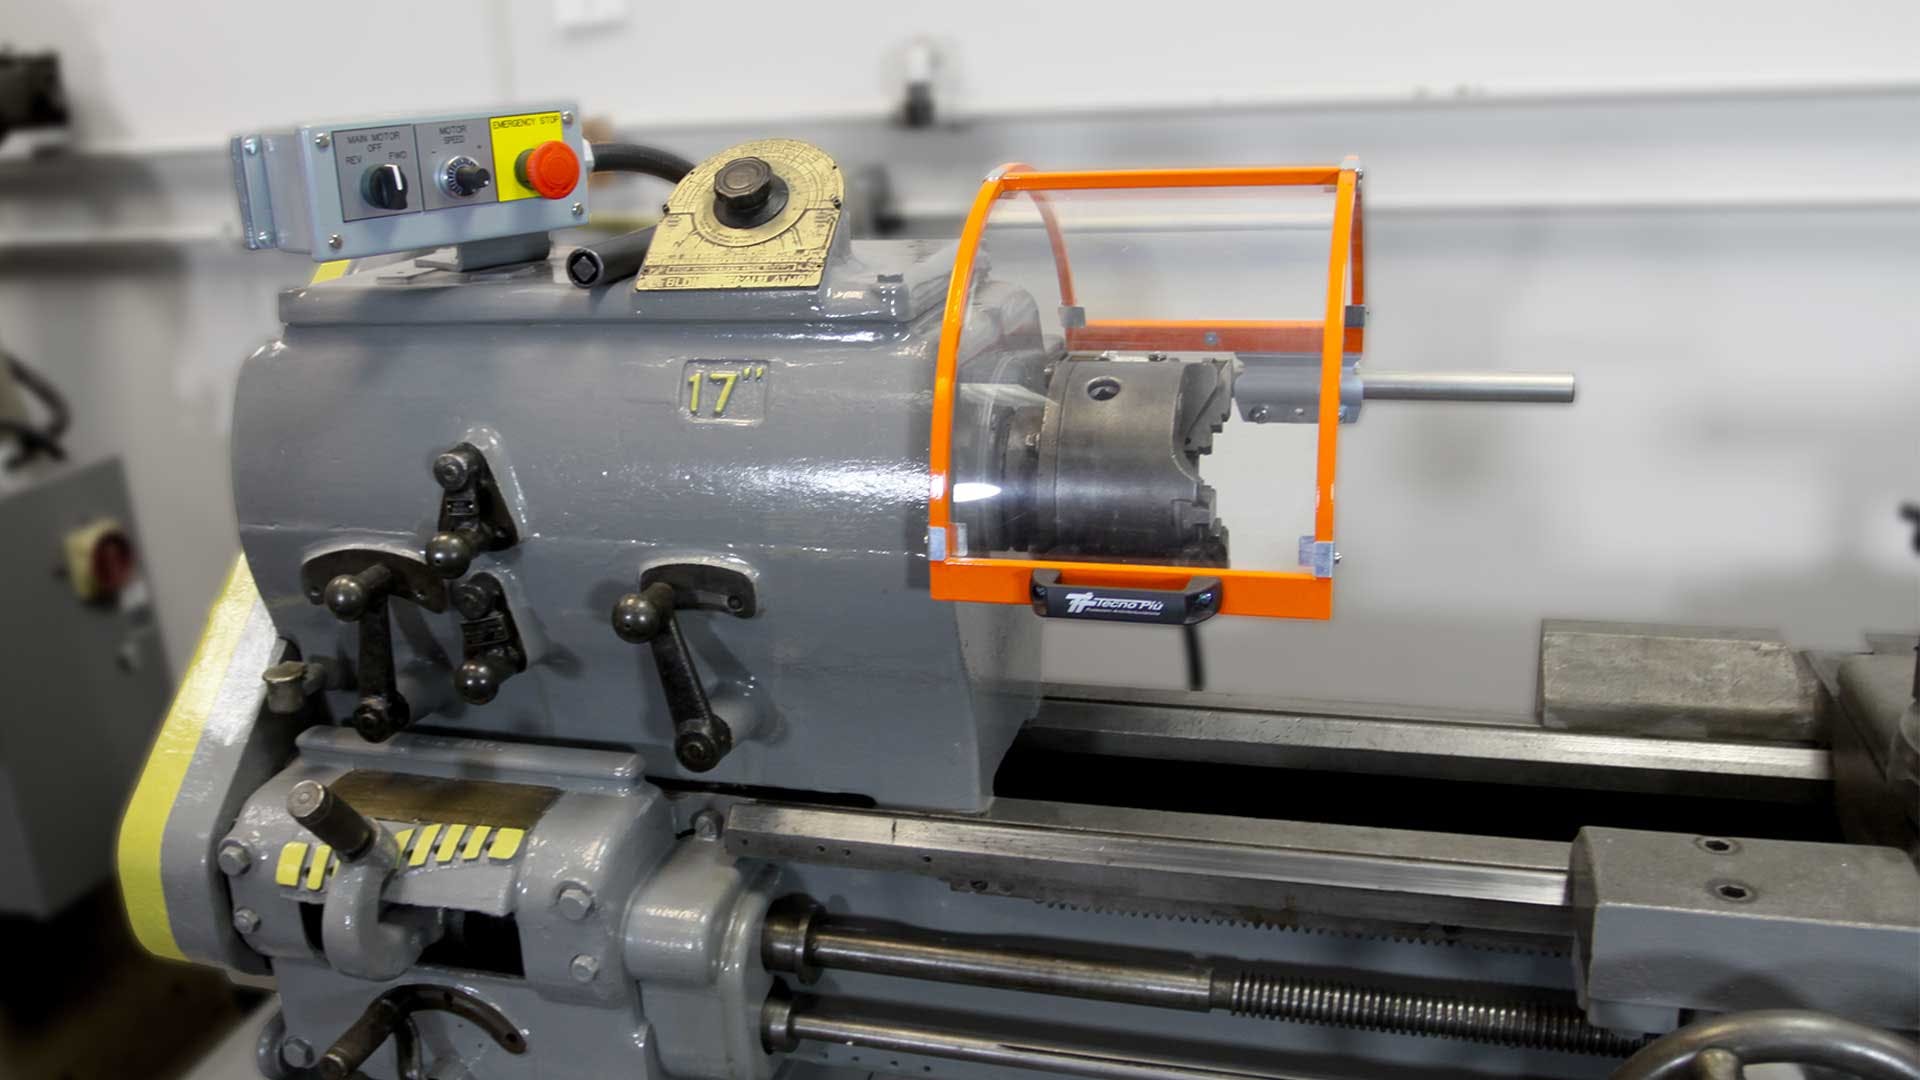 6. Common Causes of Lathe Machine Accidents and Prevention Strategies